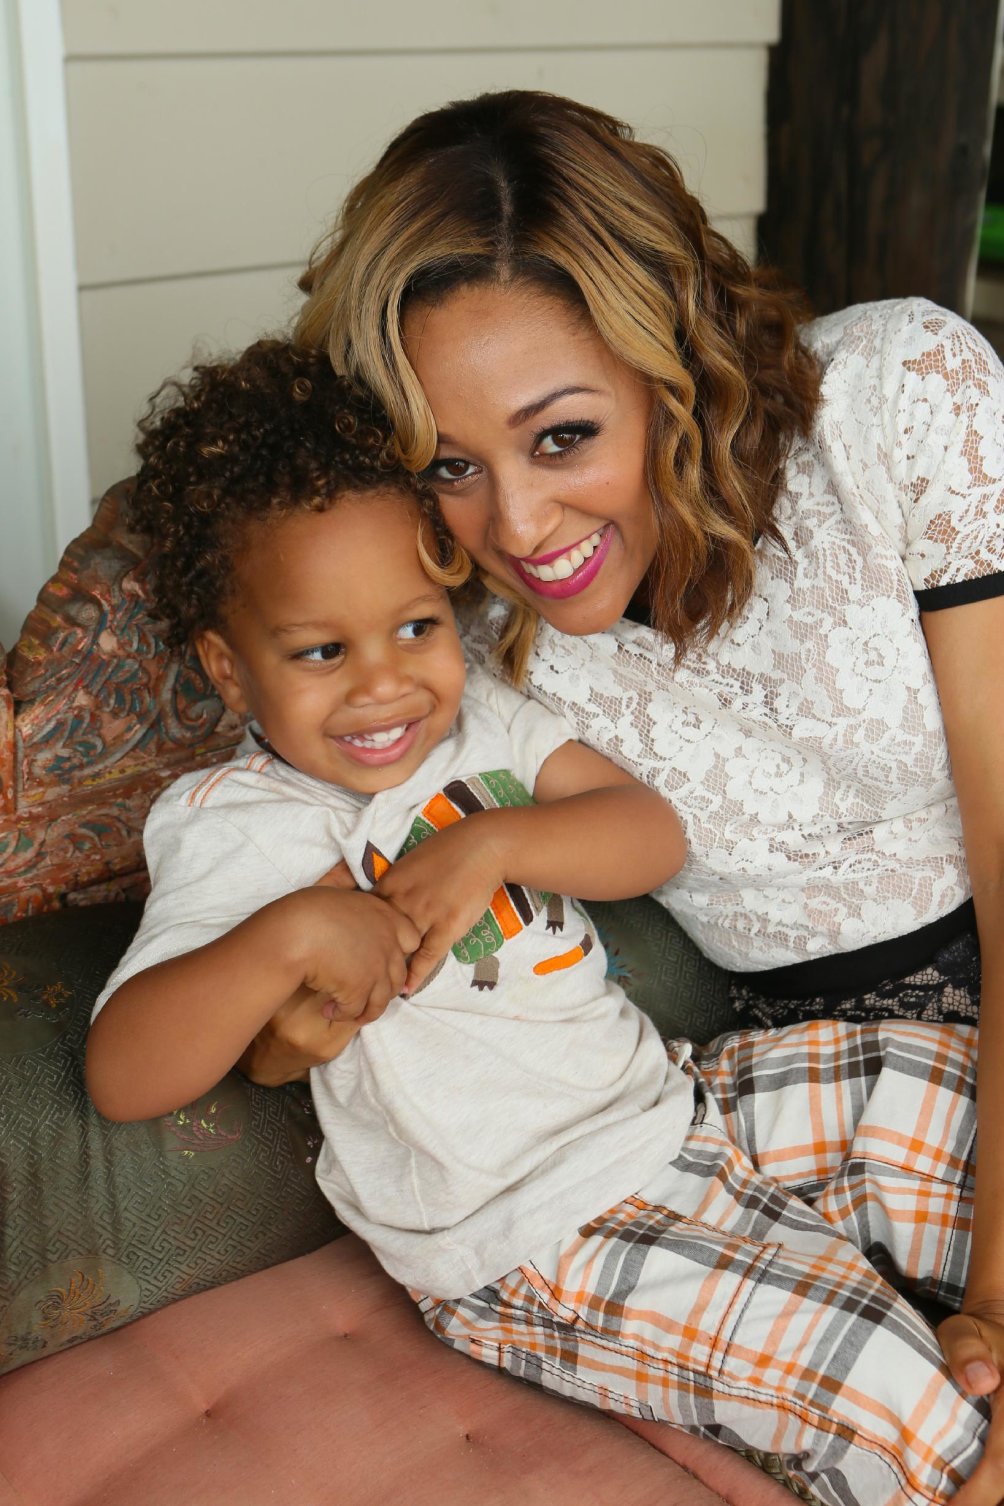 Tia Mowry and her son Cree Taylor Hardrict celebrate her 35th birthday at the LYFE Kitchen Beach House powered by KIA on Sunday July 21, 2013 in Malibu, CA. (Photo by Alexandra Wyman/Invision for Talent Resources/AP Images)